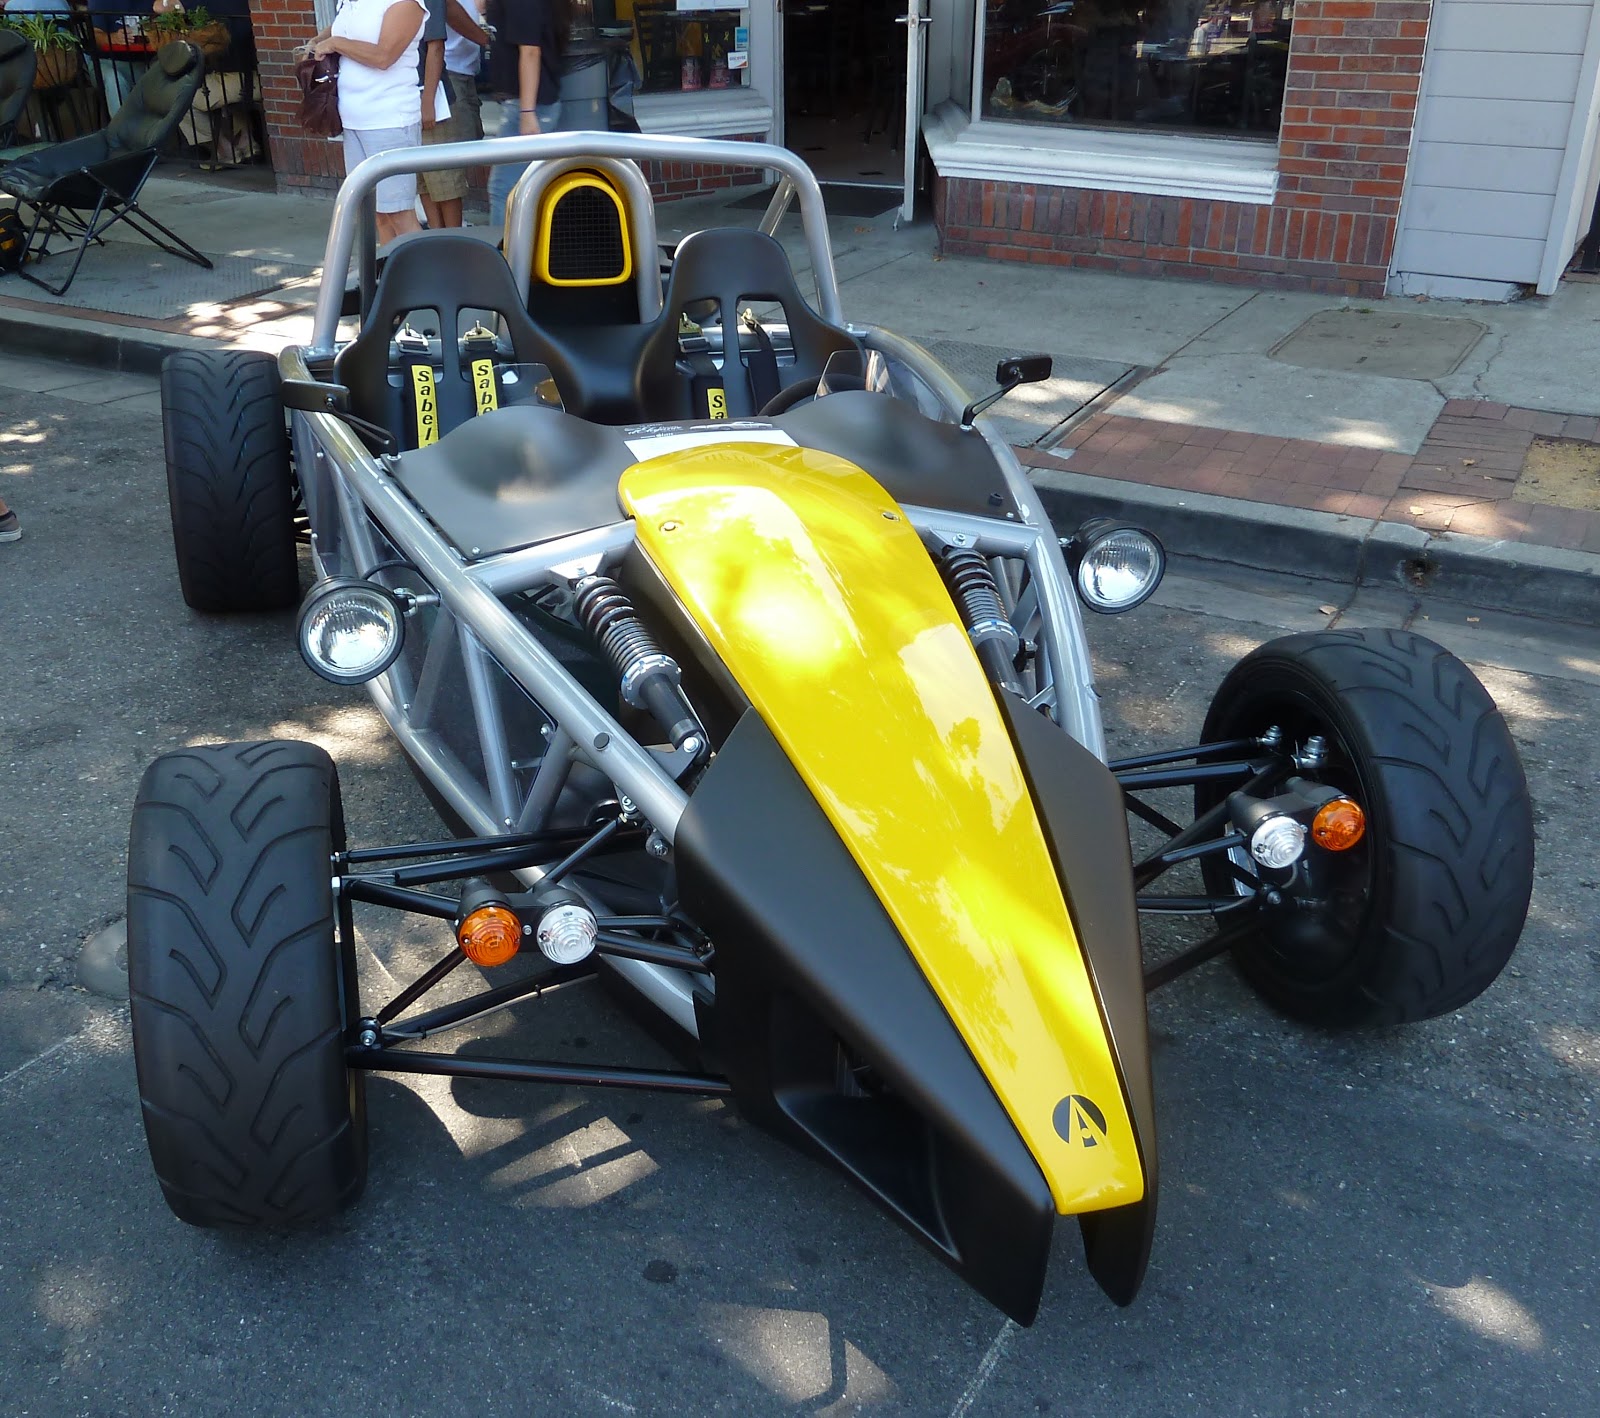 Ariel Atom – Like A Motorcycle With Four Wheels